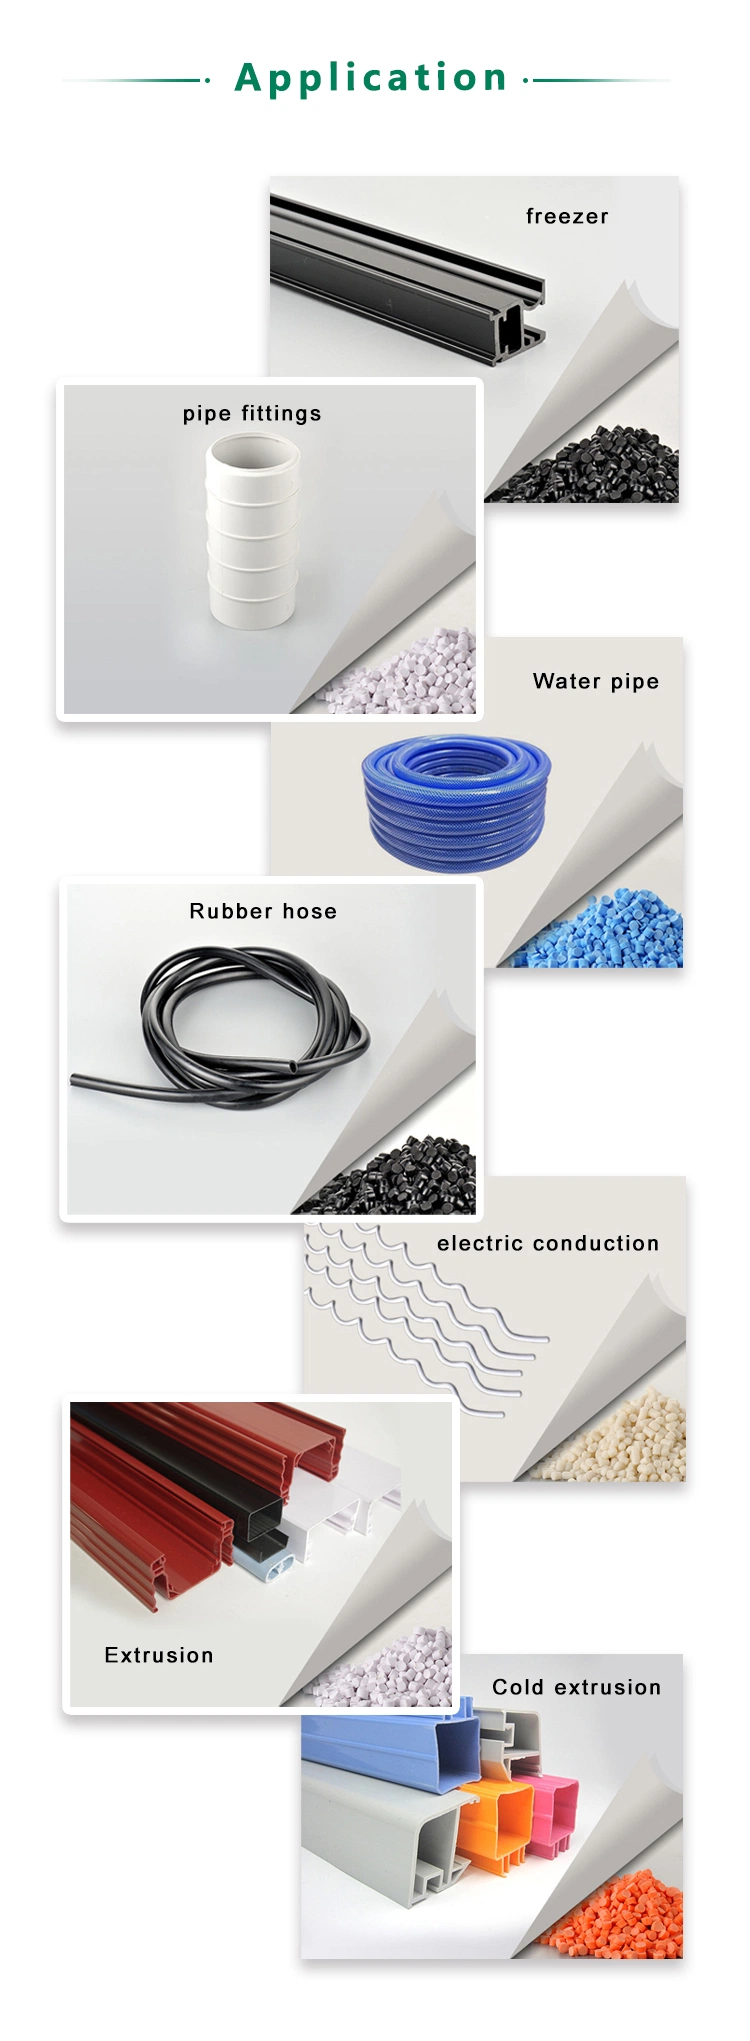 PVC Resin Virgin Material PVC Compound for Electric Wire and Cable Jacket